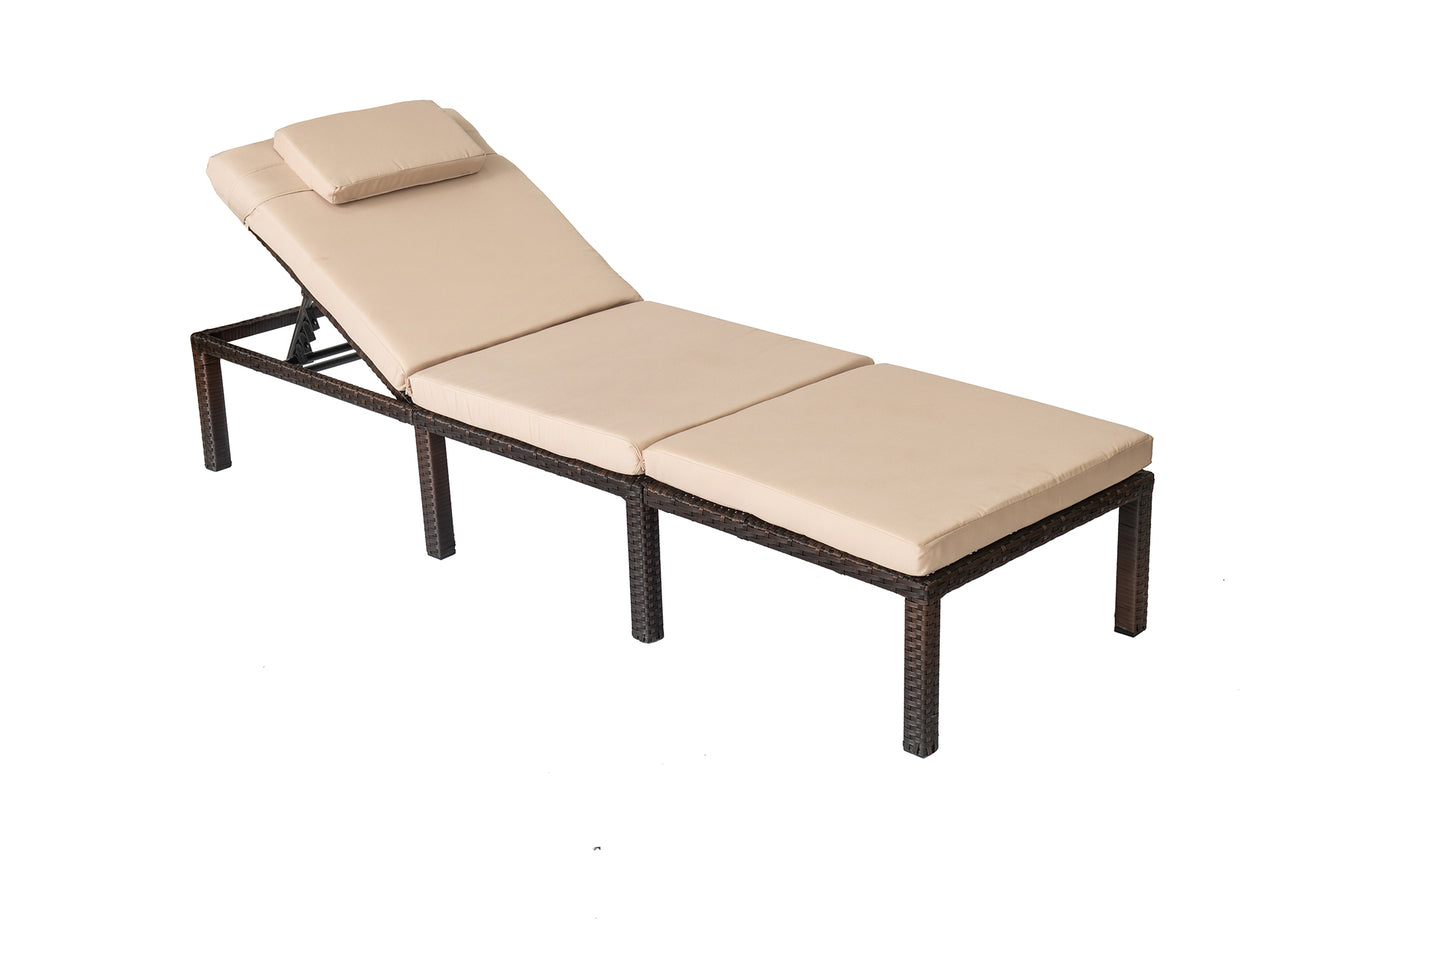 Straame Rattan Outdoors Sunlounger